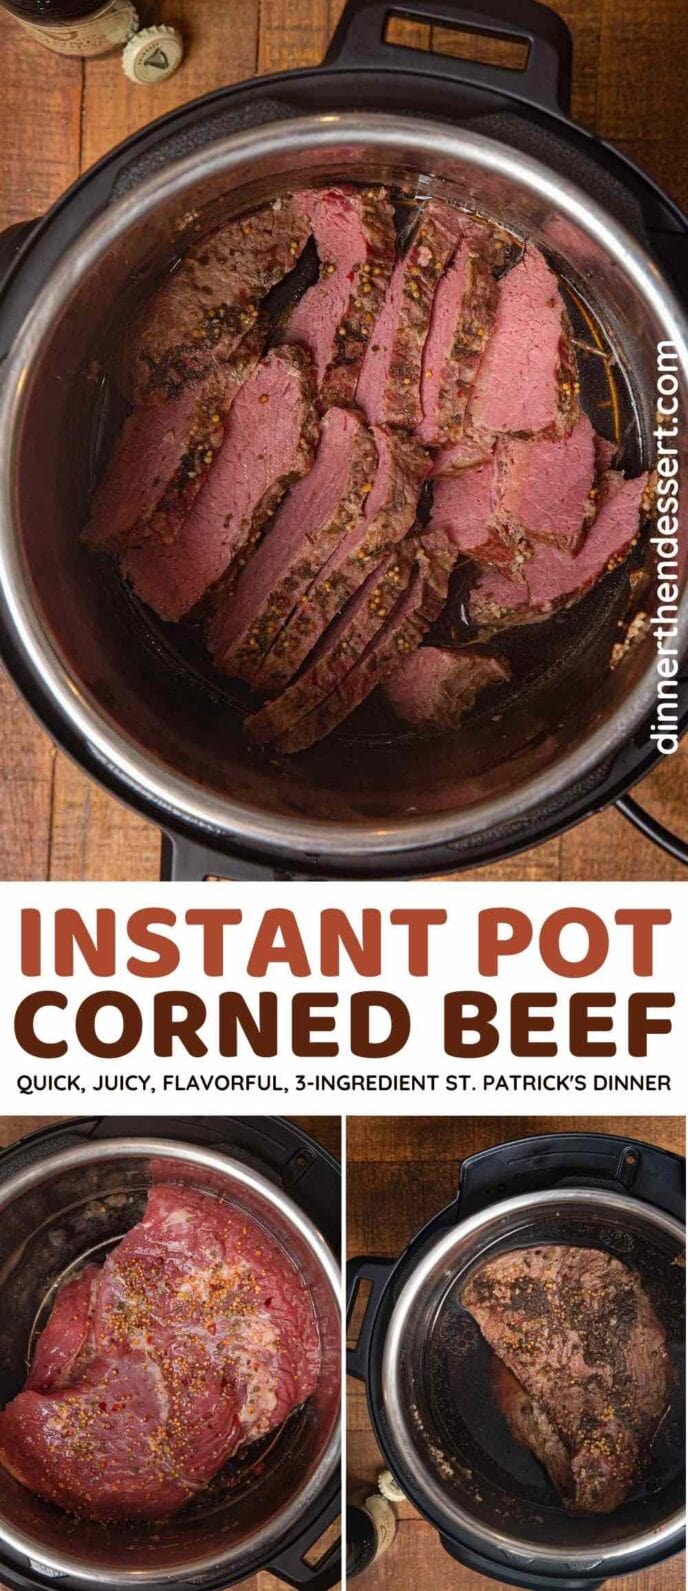 Instant Pot Corned Beef collage